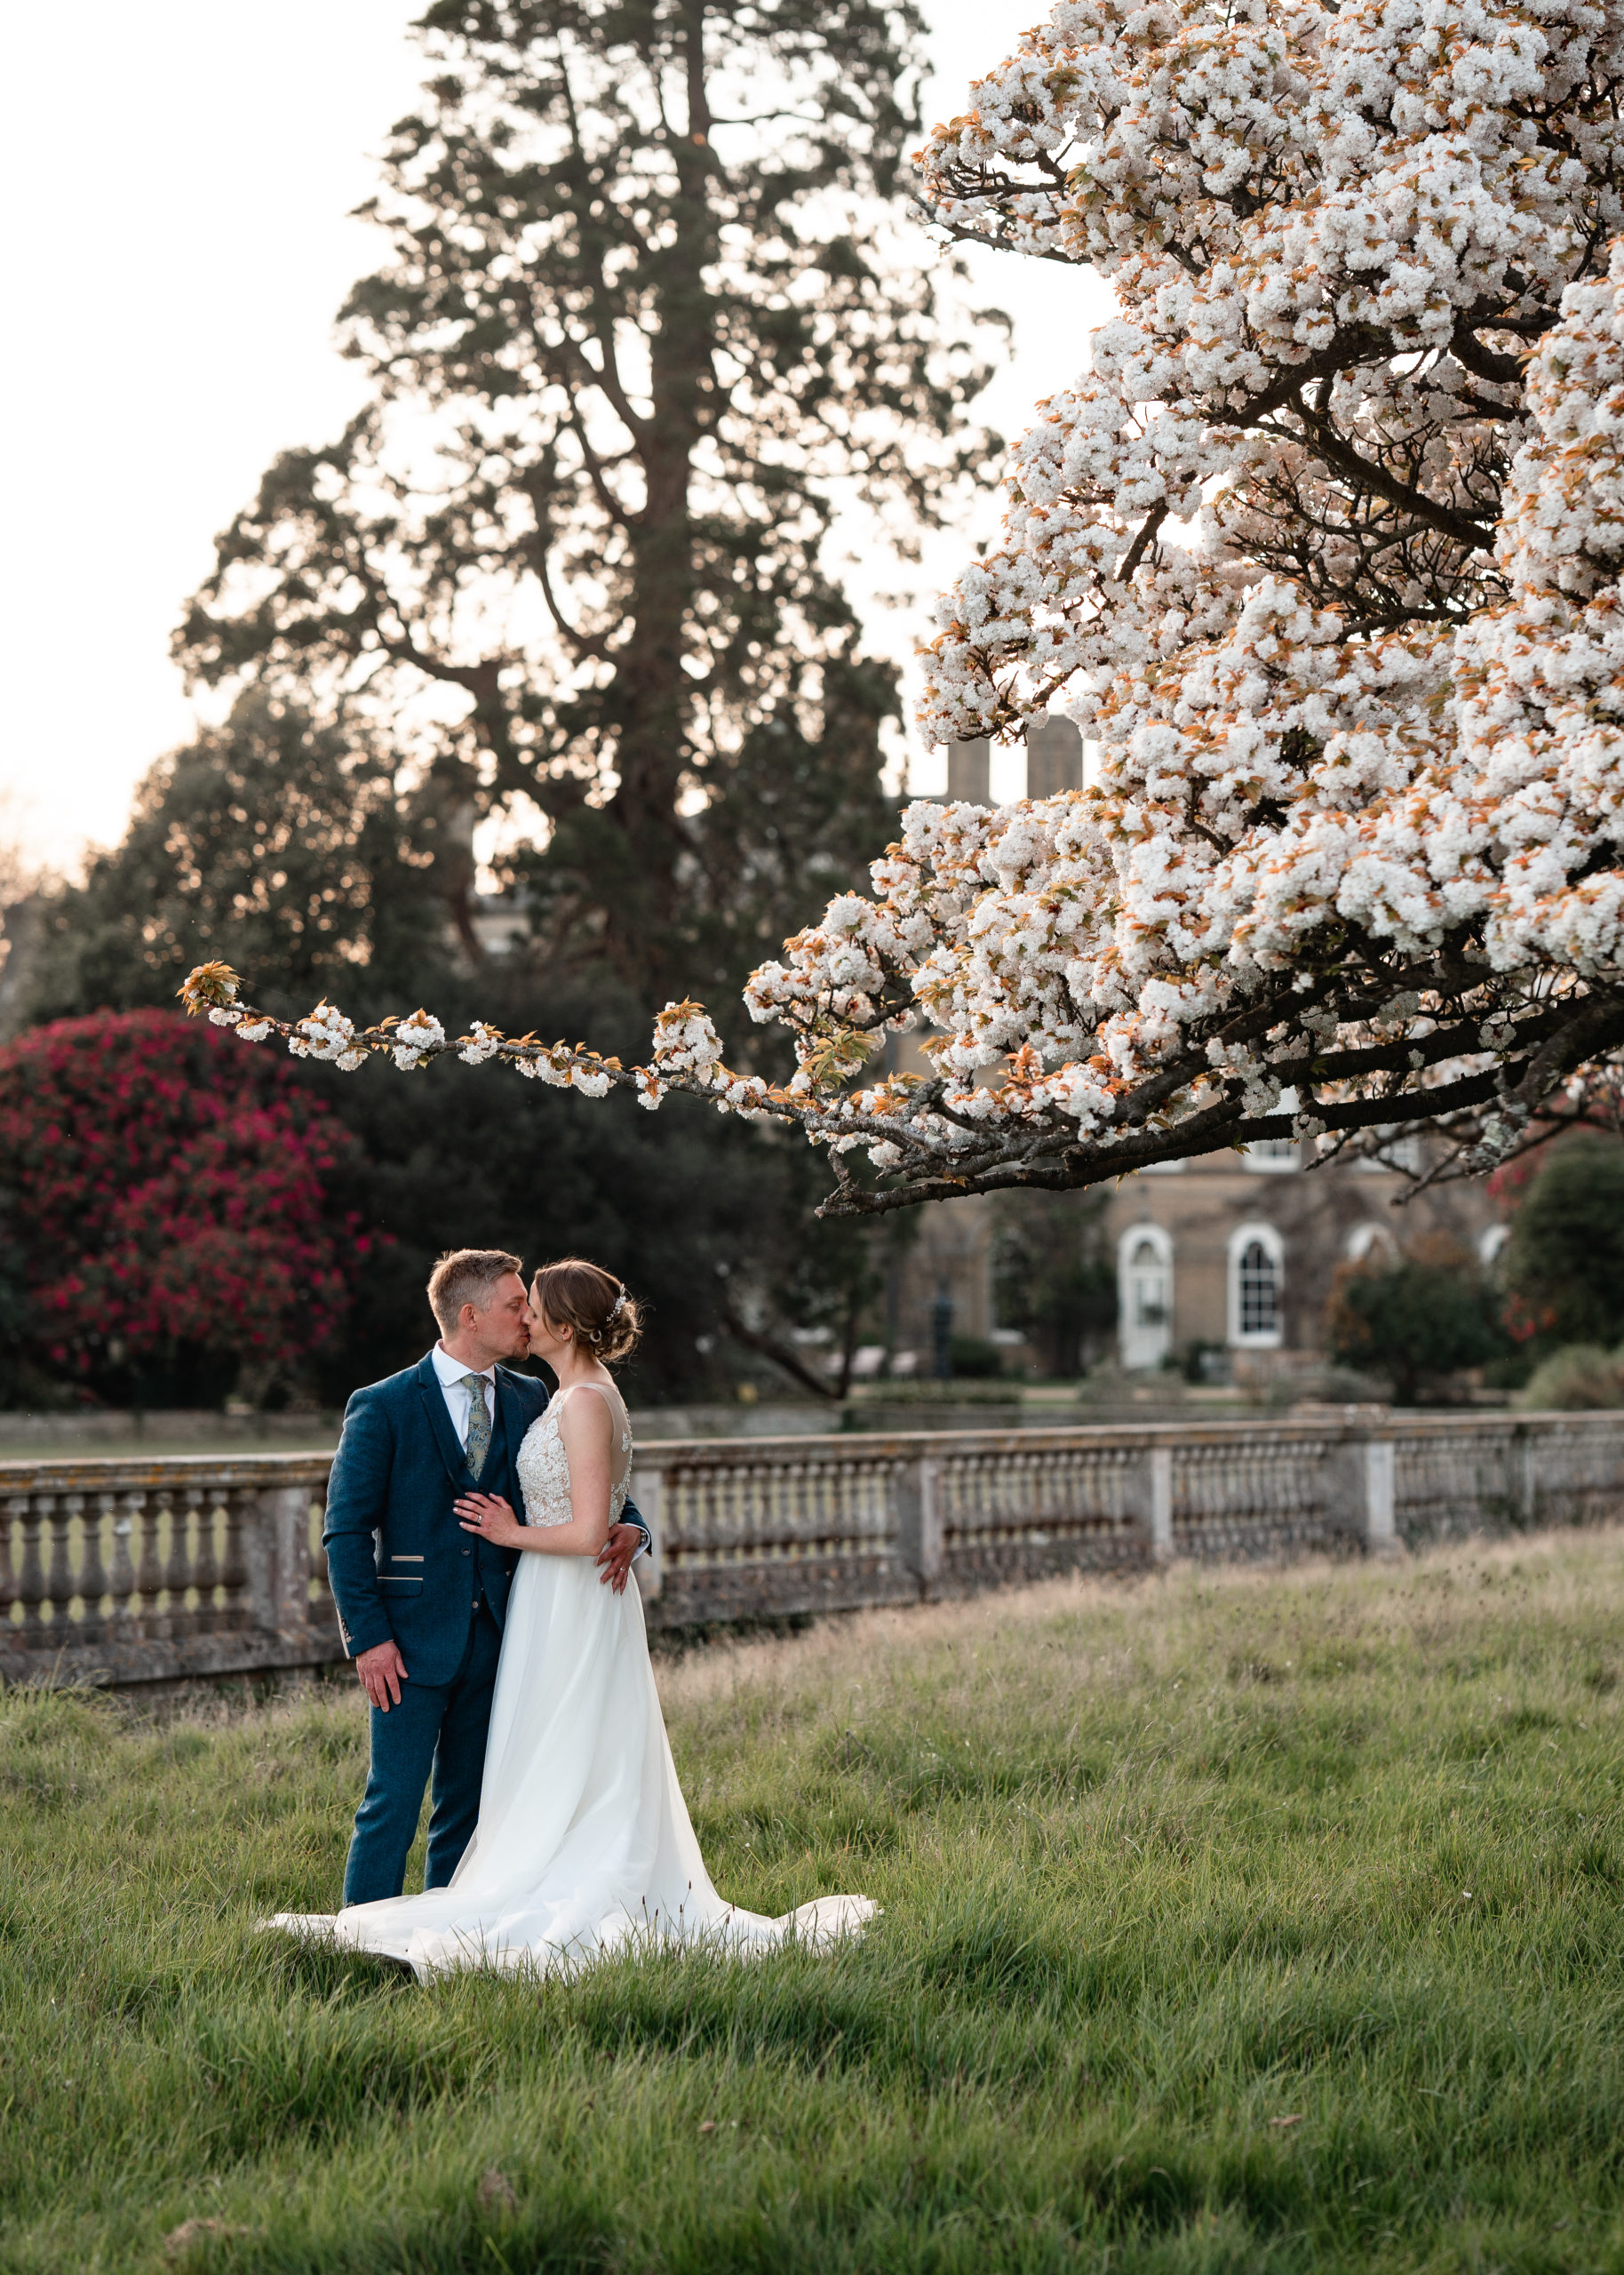 Spring Blossom wedding photos in Pylewell park